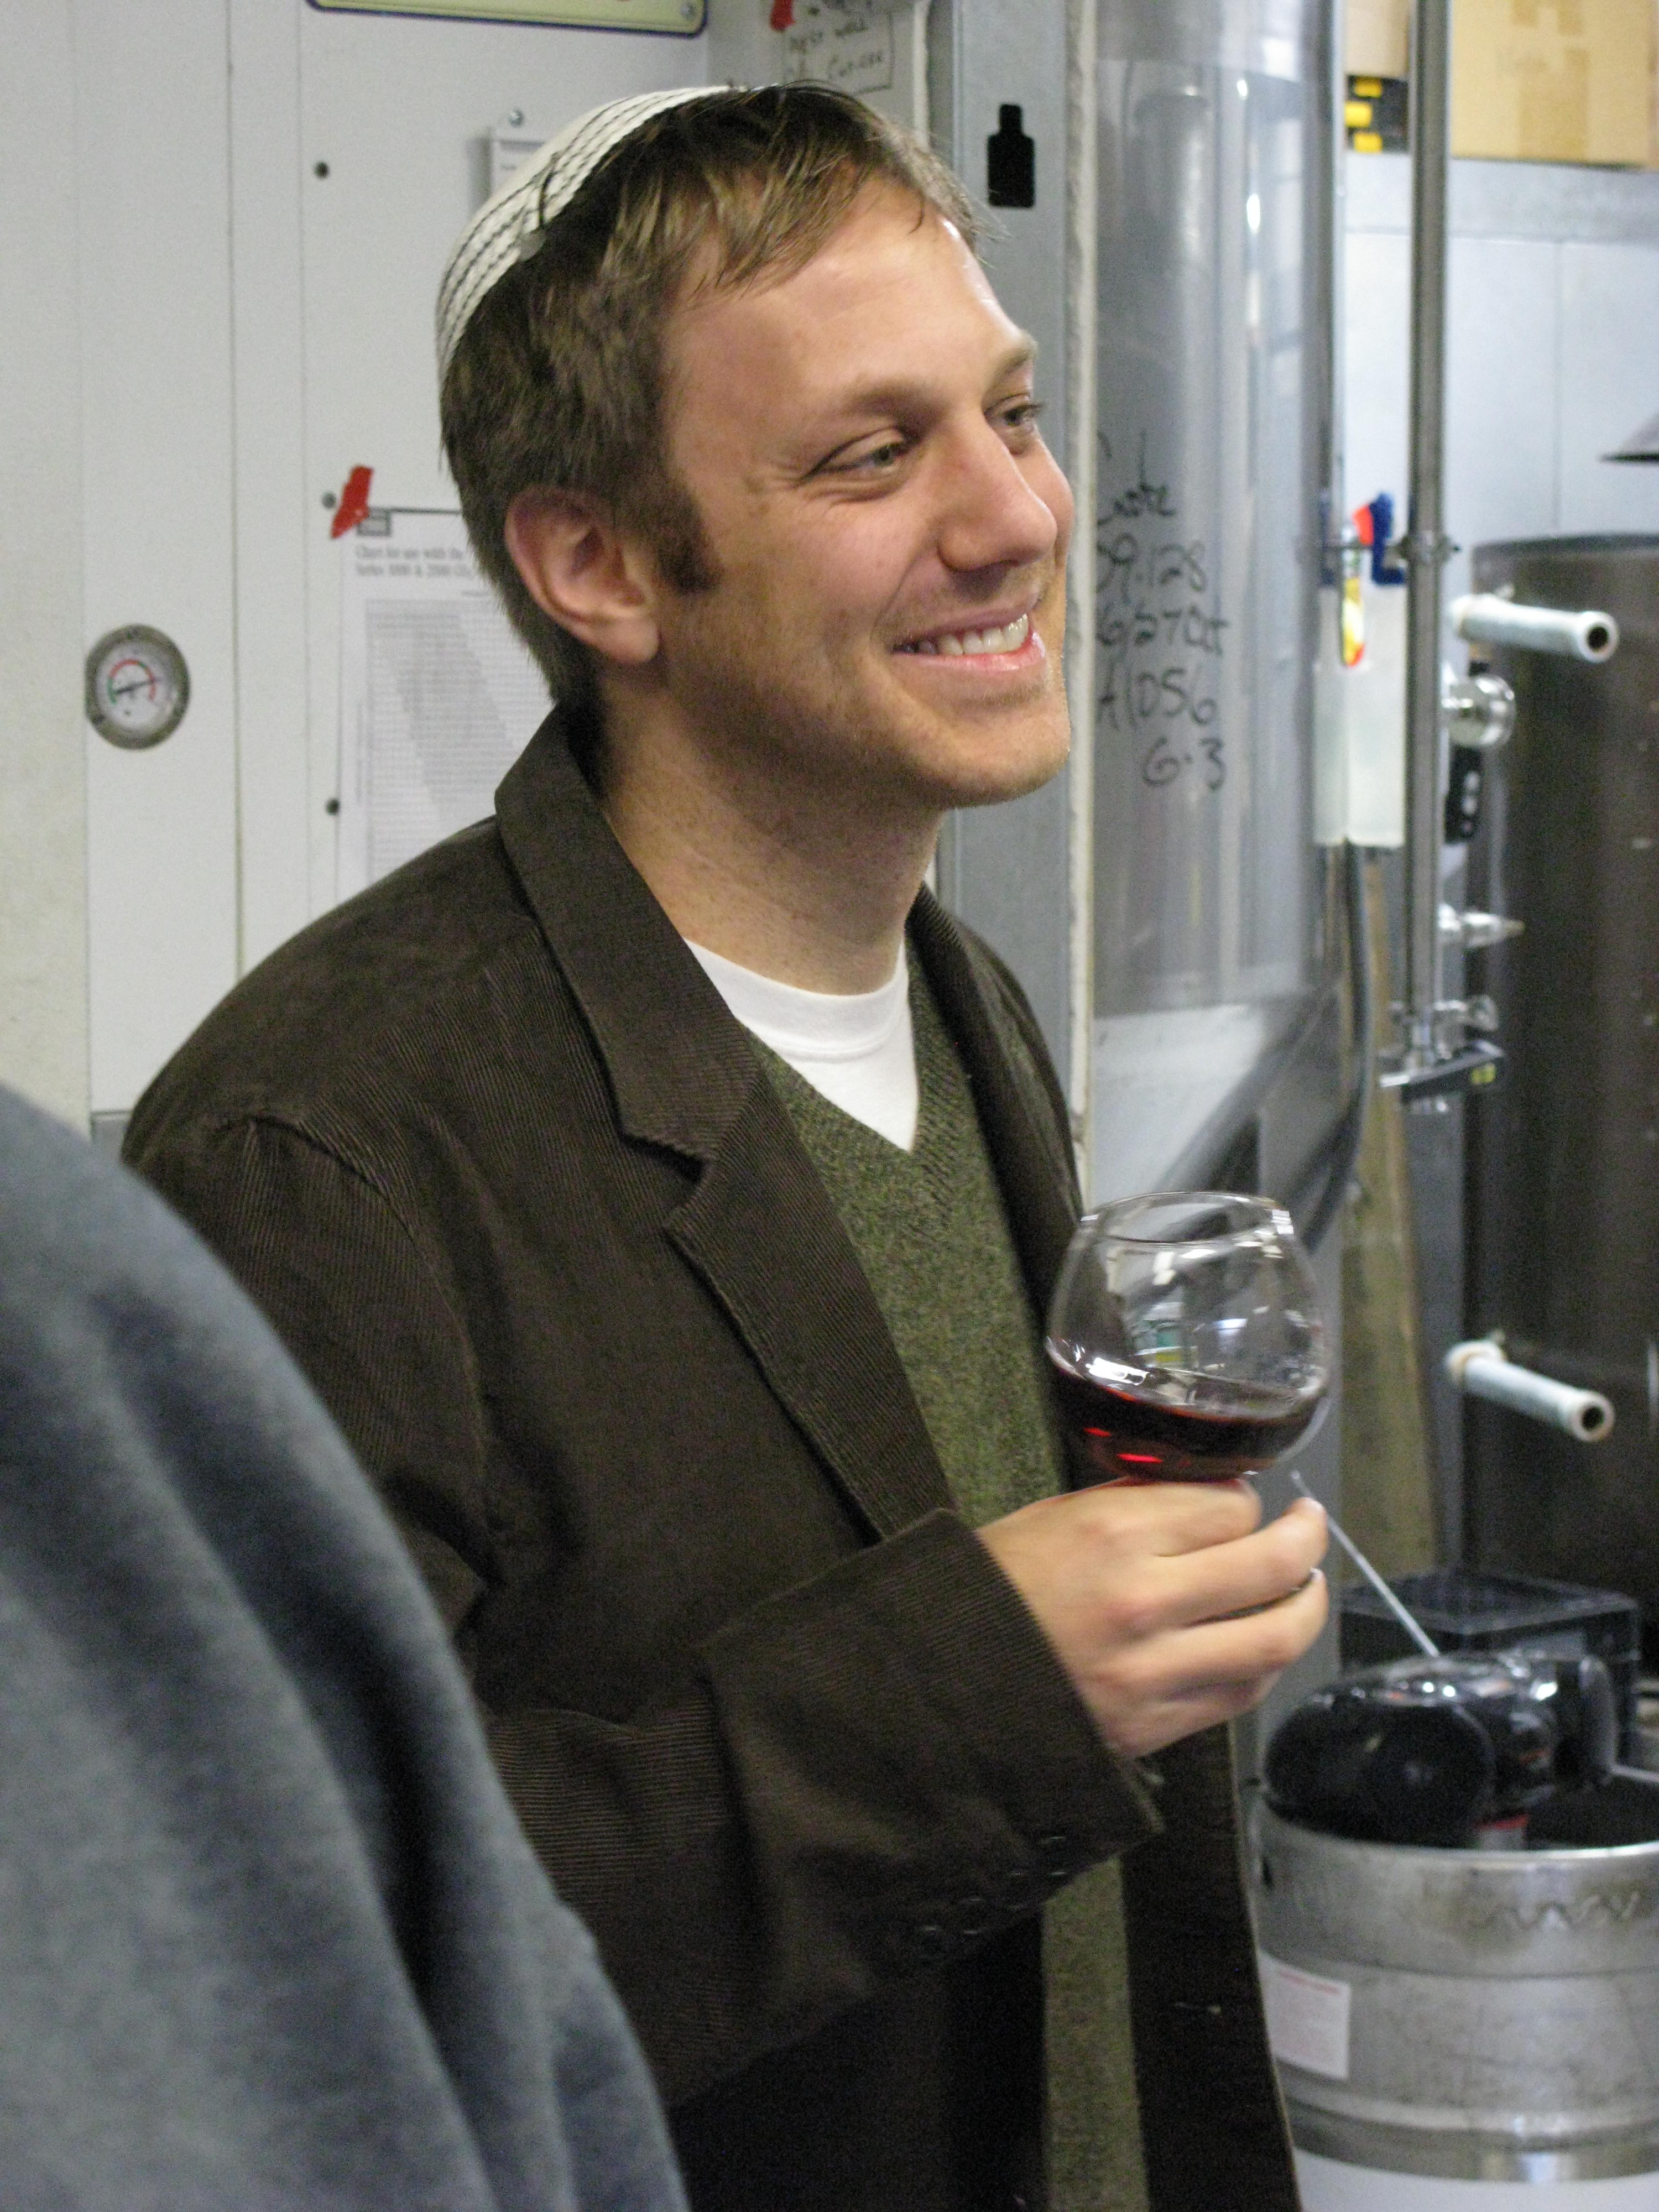 Rabbi Bradley Greenstein was at Lompoc brewery to bless Lompoc's new Hannukah beer, 8 Malty Nights. (FoystonFoto)